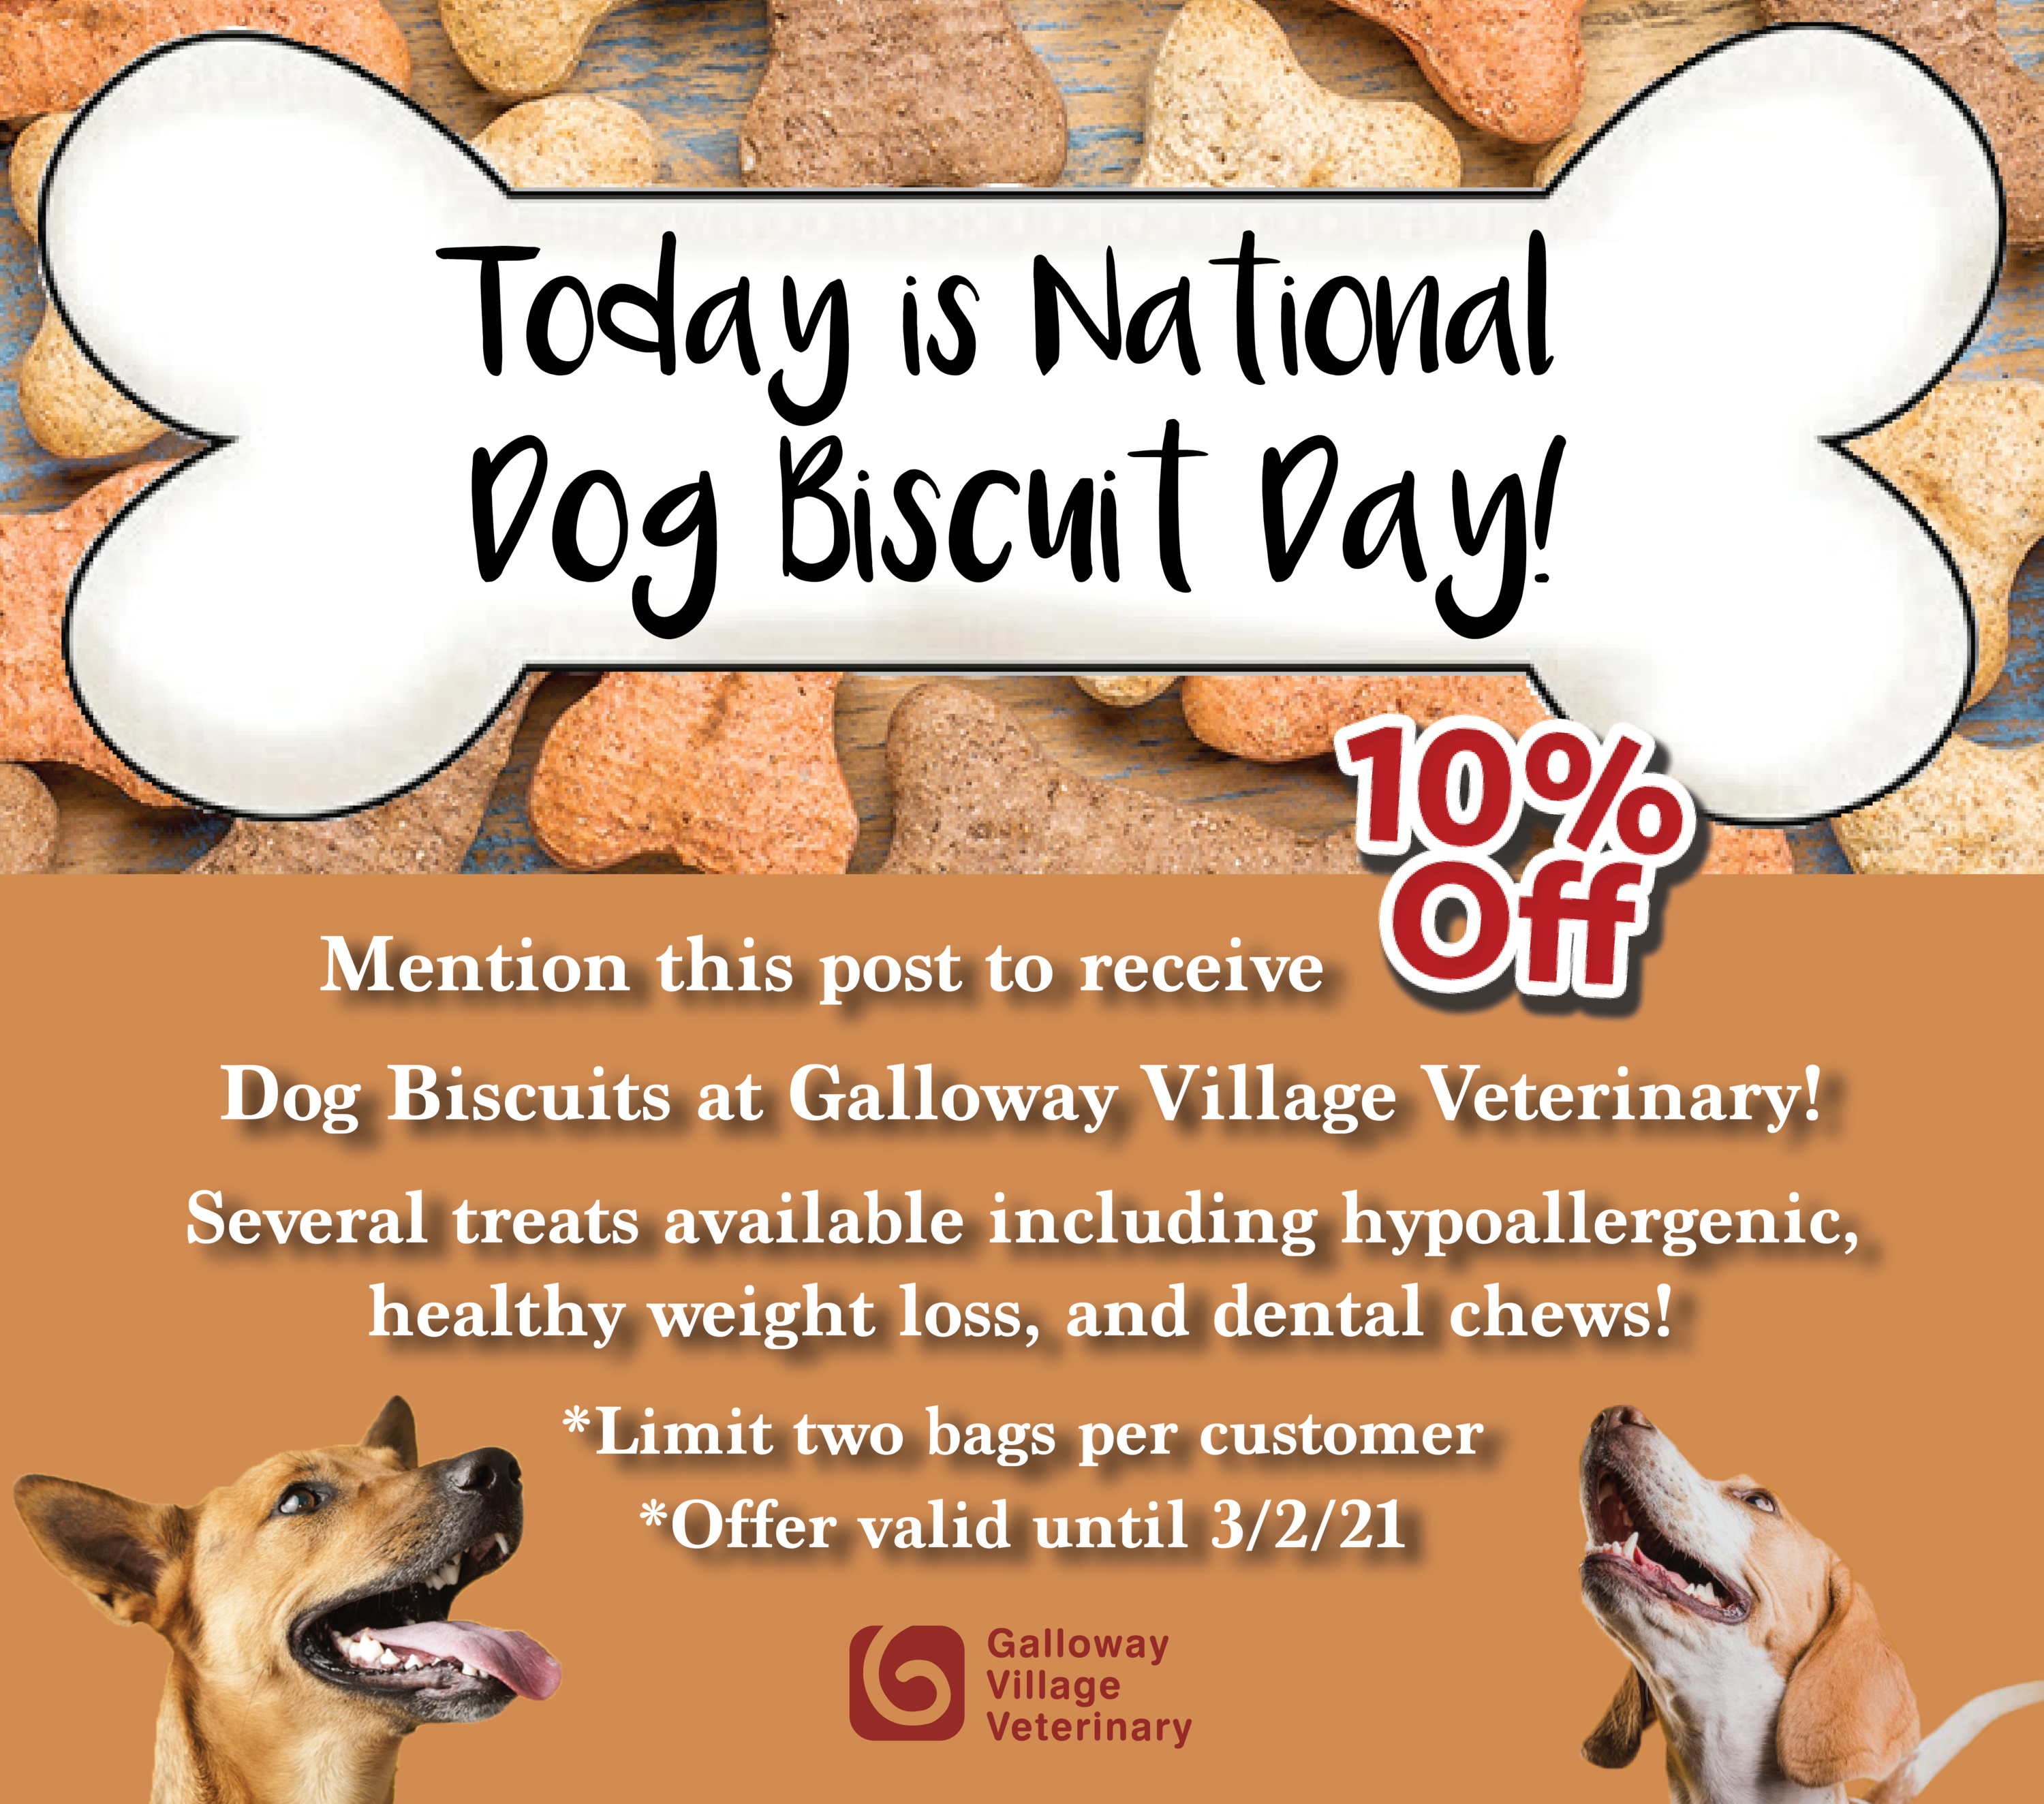 In celebration of National Dog Biscuit Day, we will be offering 10% off any bag of dog treats or chews.